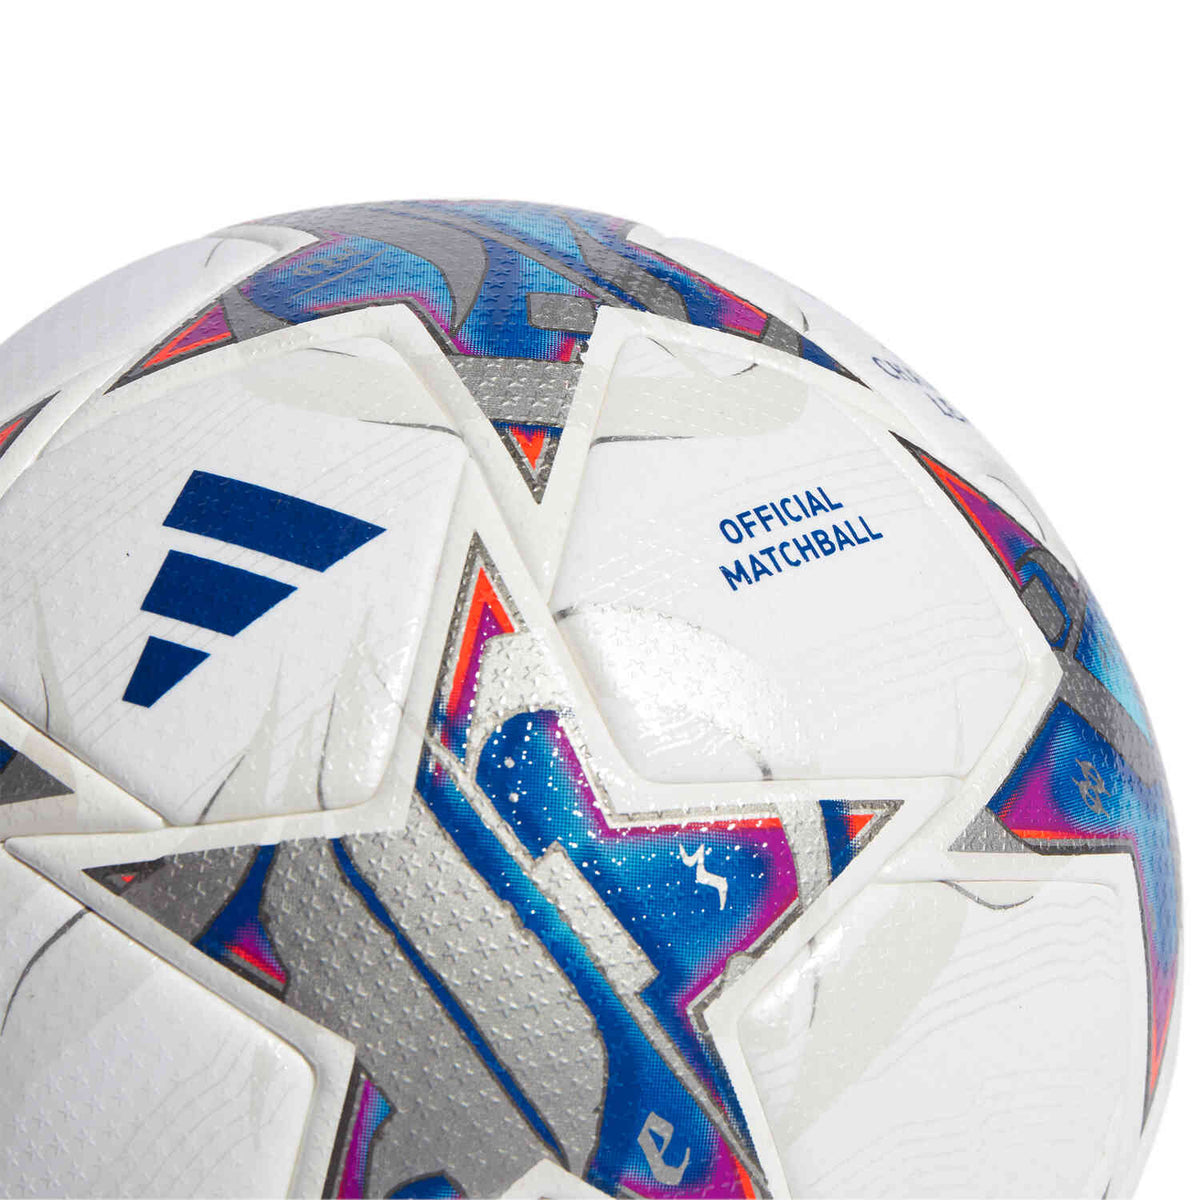 adidas 2024 Champions League UCL Pro London Official Match Soccer Ball